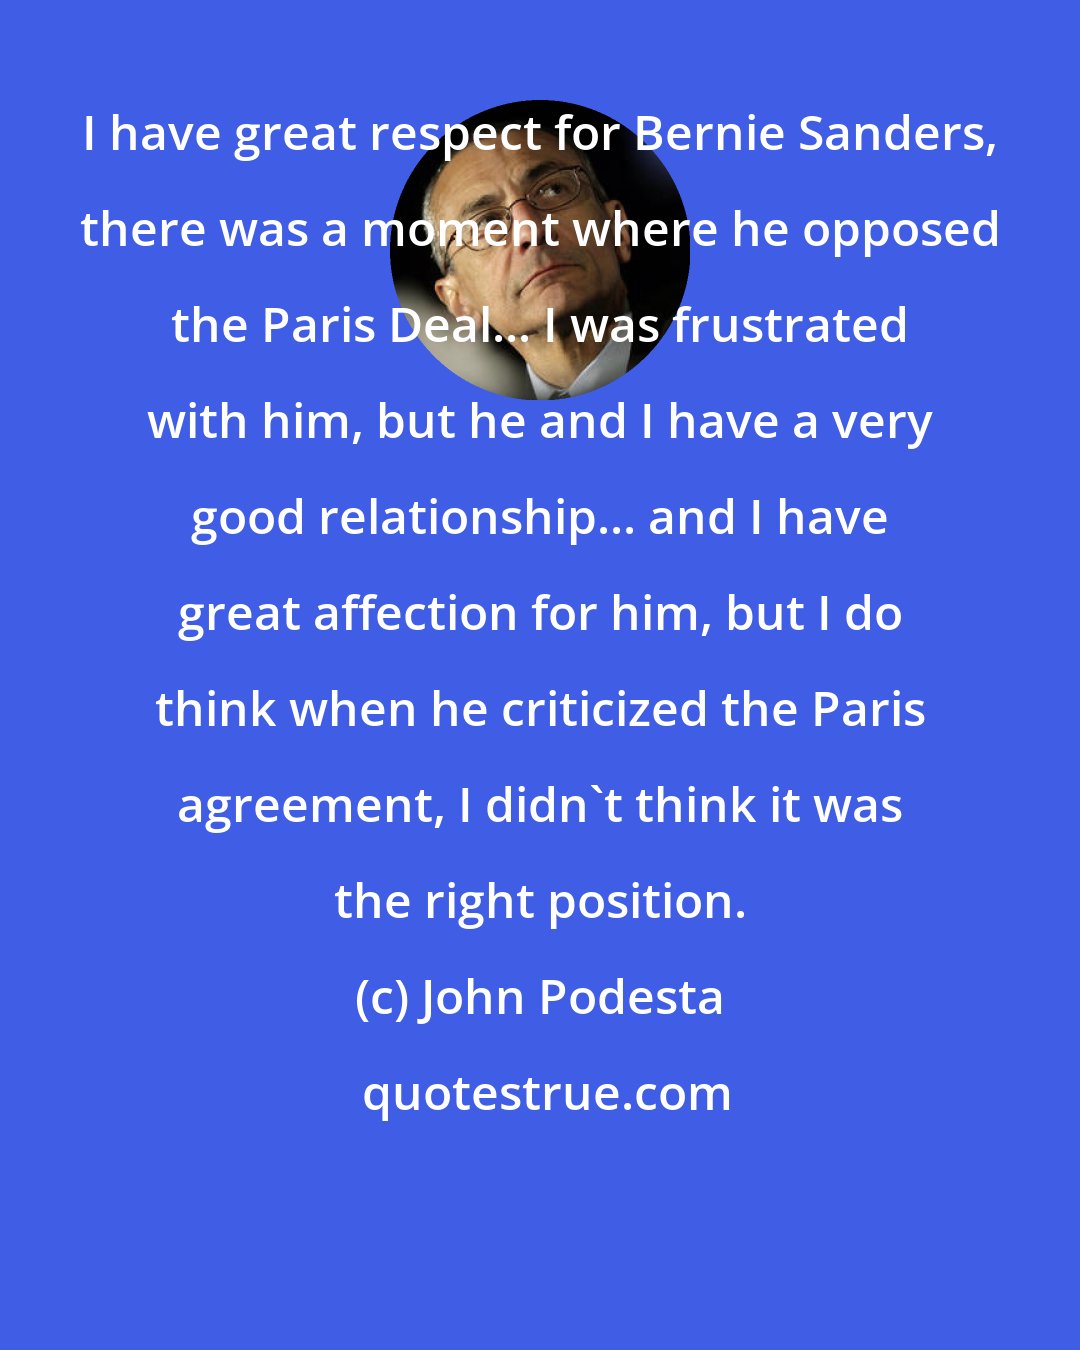 John Podesta: I have great respect for Bernie Sanders, there was a moment where he opposed the Paris Deal... I was frustrated with him, but he and I have a very good relationship... and I have great affection for him, but I do think when he criticized the Paris agreement, I didn't think it was the right position.